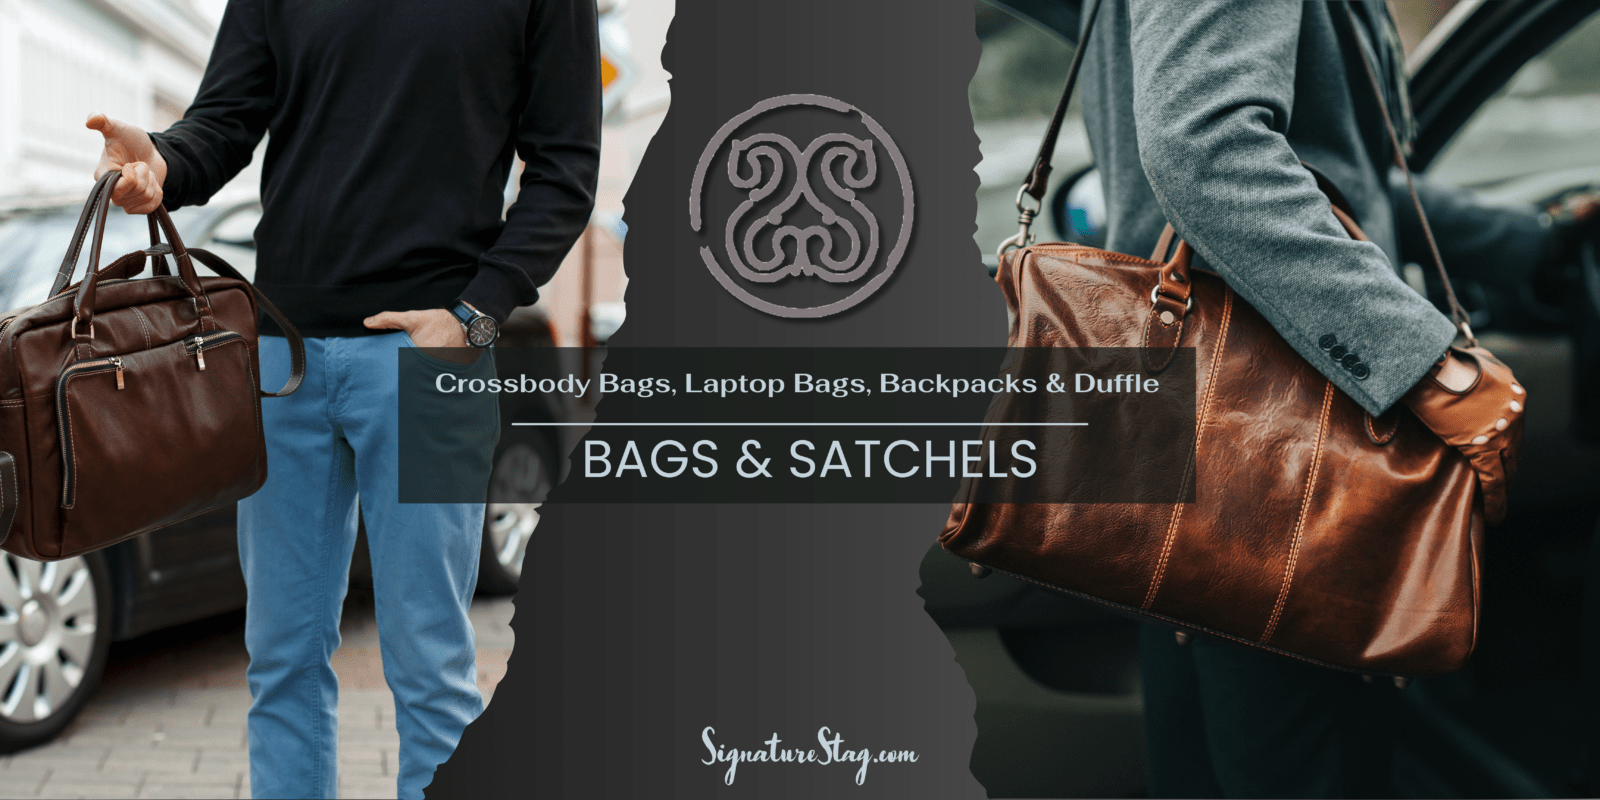 Find Men's Leather Bags in Lubbock TX and Midland TX Clothing Stores. School bags, laptop bags, cooler bags, and backpacks.